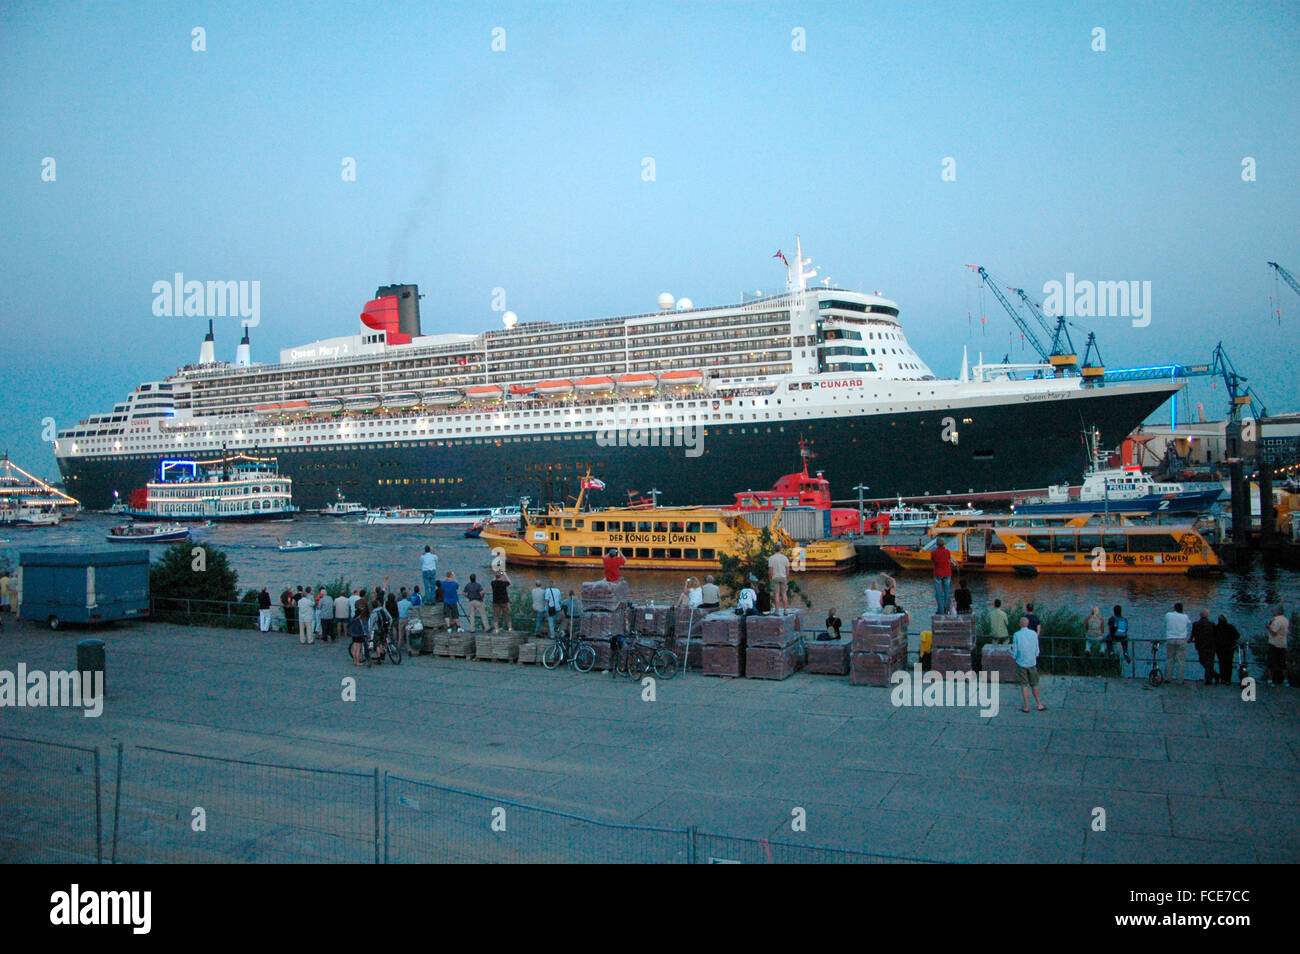 JULY 16, 2006 - HAMBURG: the oceanliner 'Queen Mary 2' leaves the harbour of Hamburg, Germany. Stock Photo